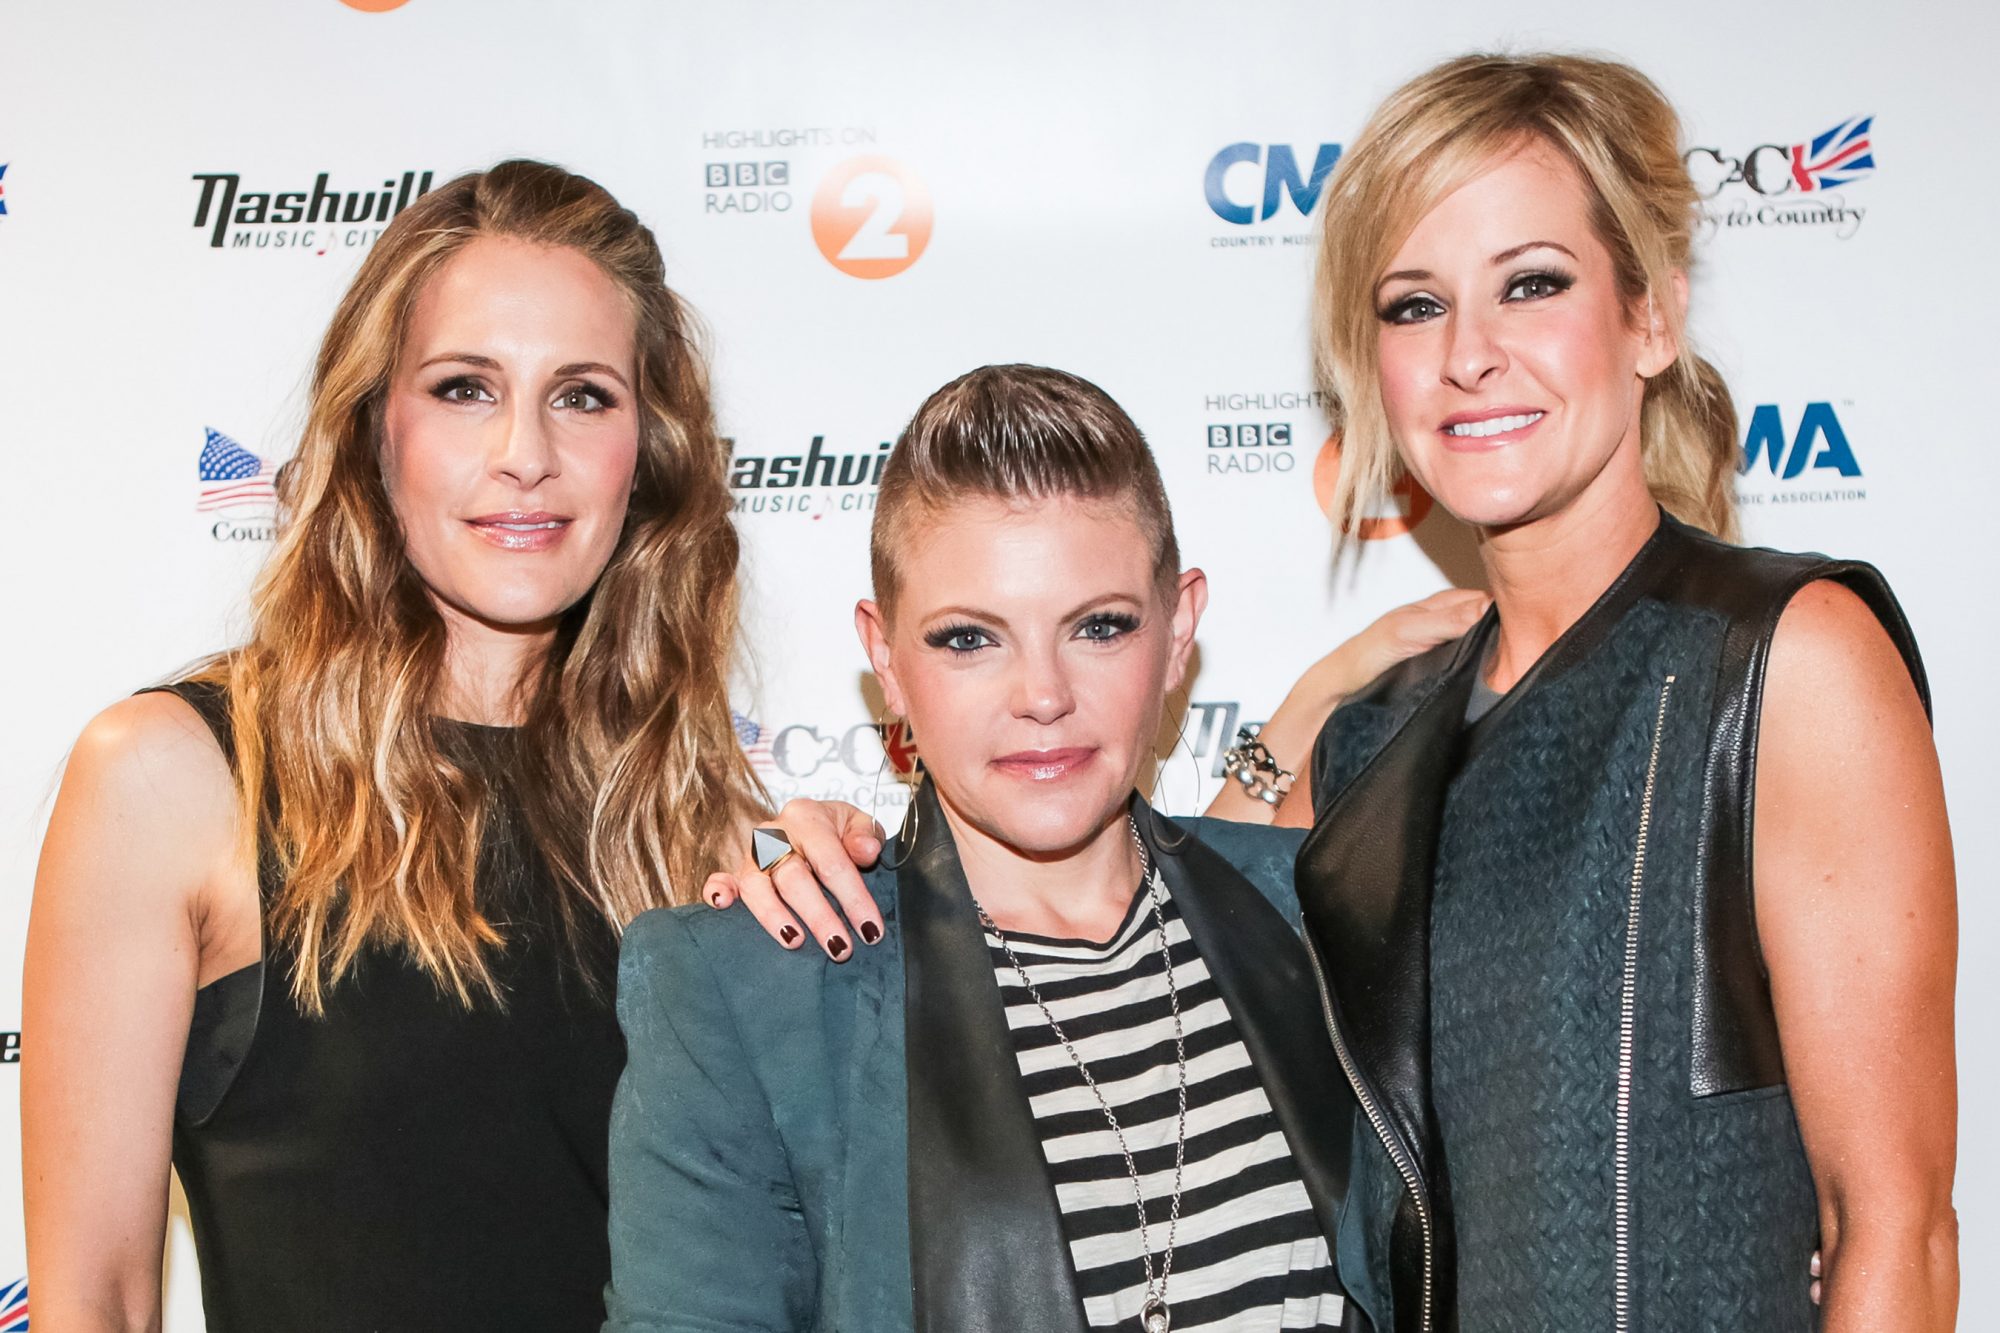 Dixie Chicks confirm a new album is coming